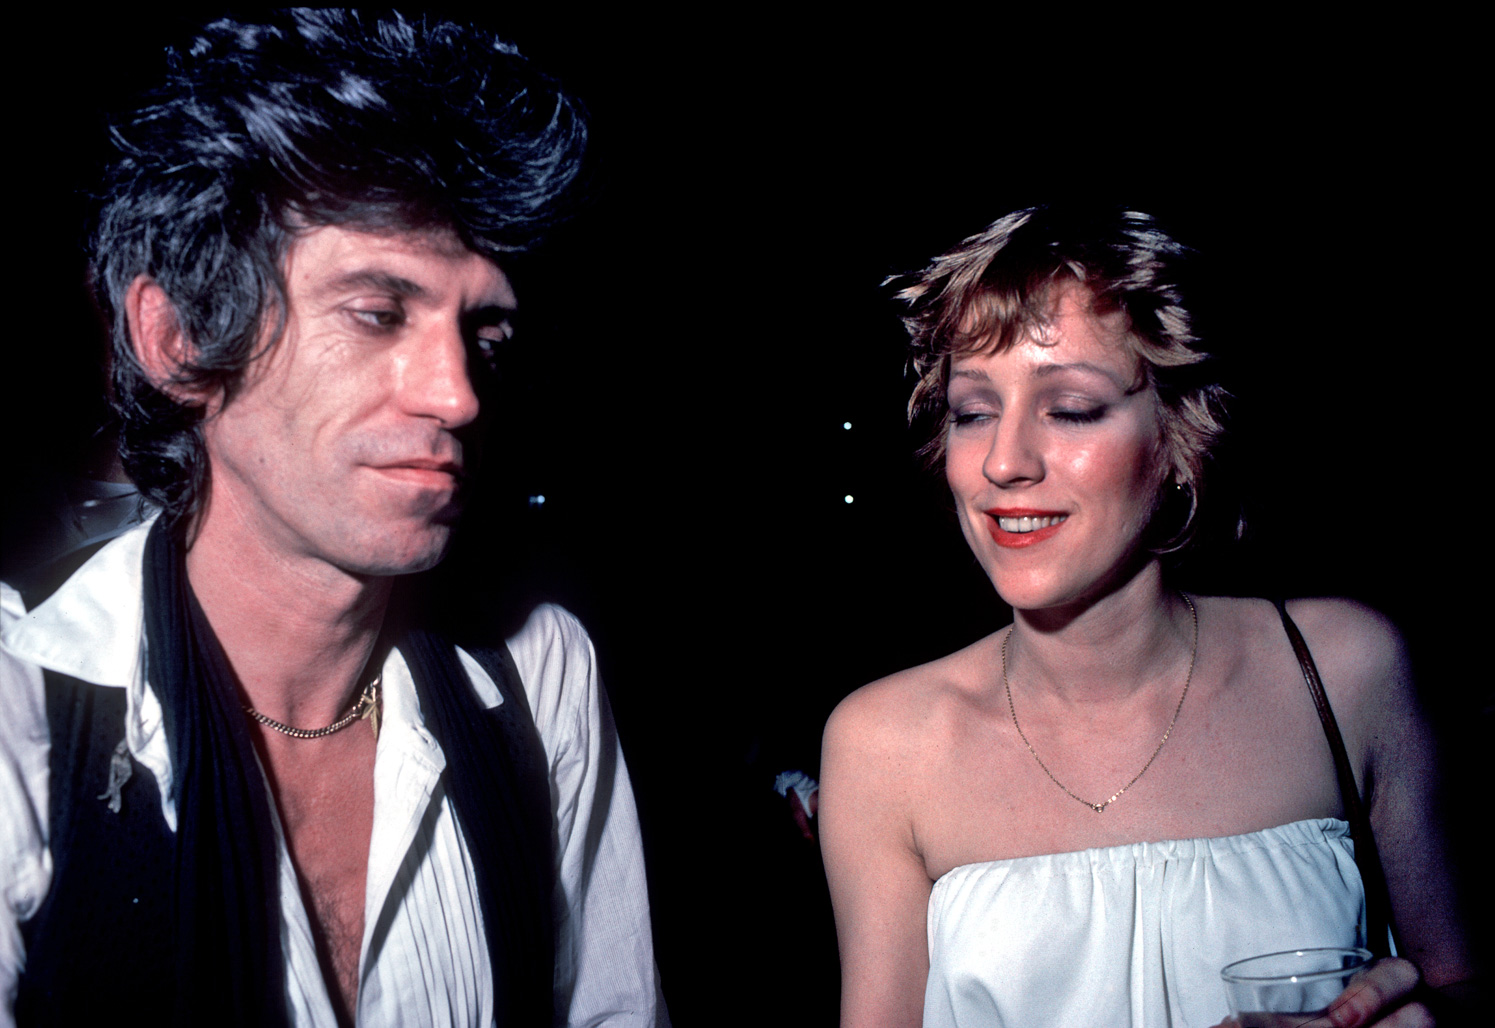 Keith Richards at The Ritz Prom Night